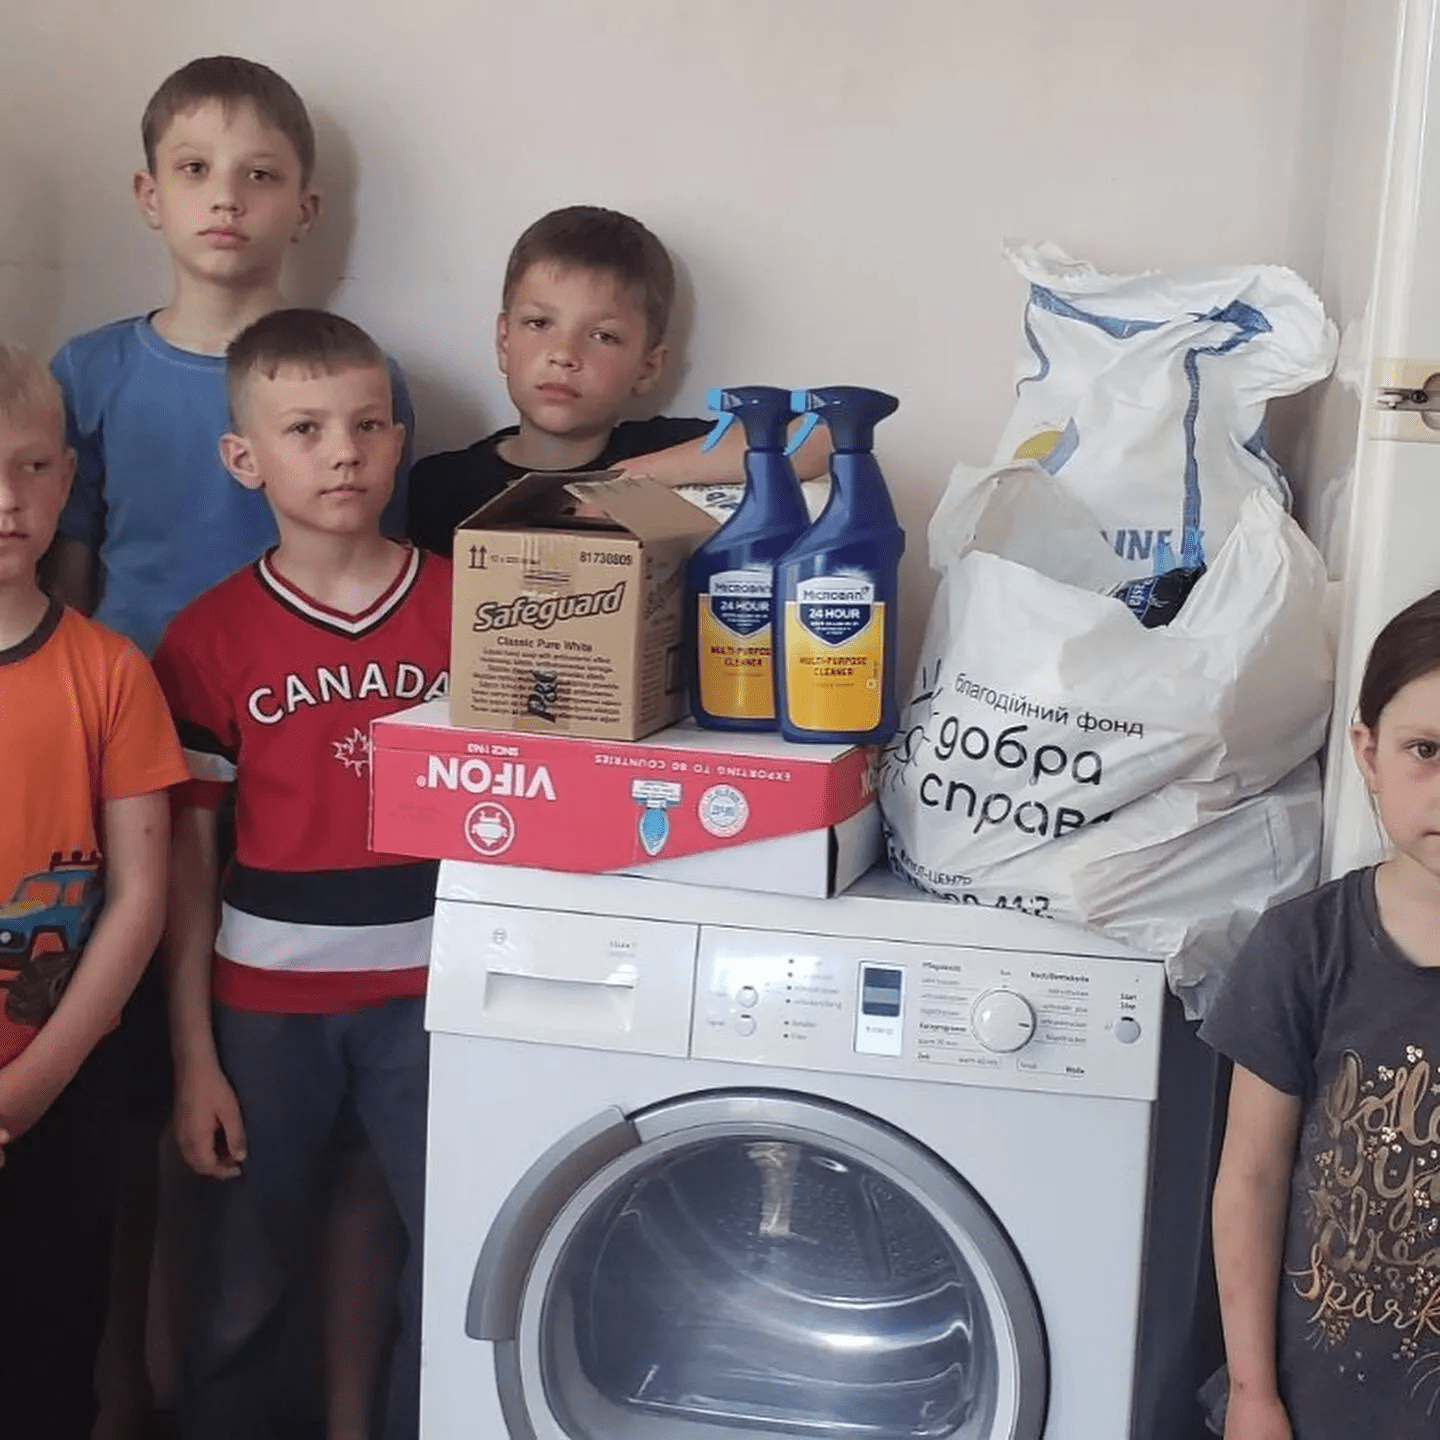 a group of children standing next to a washing machine.